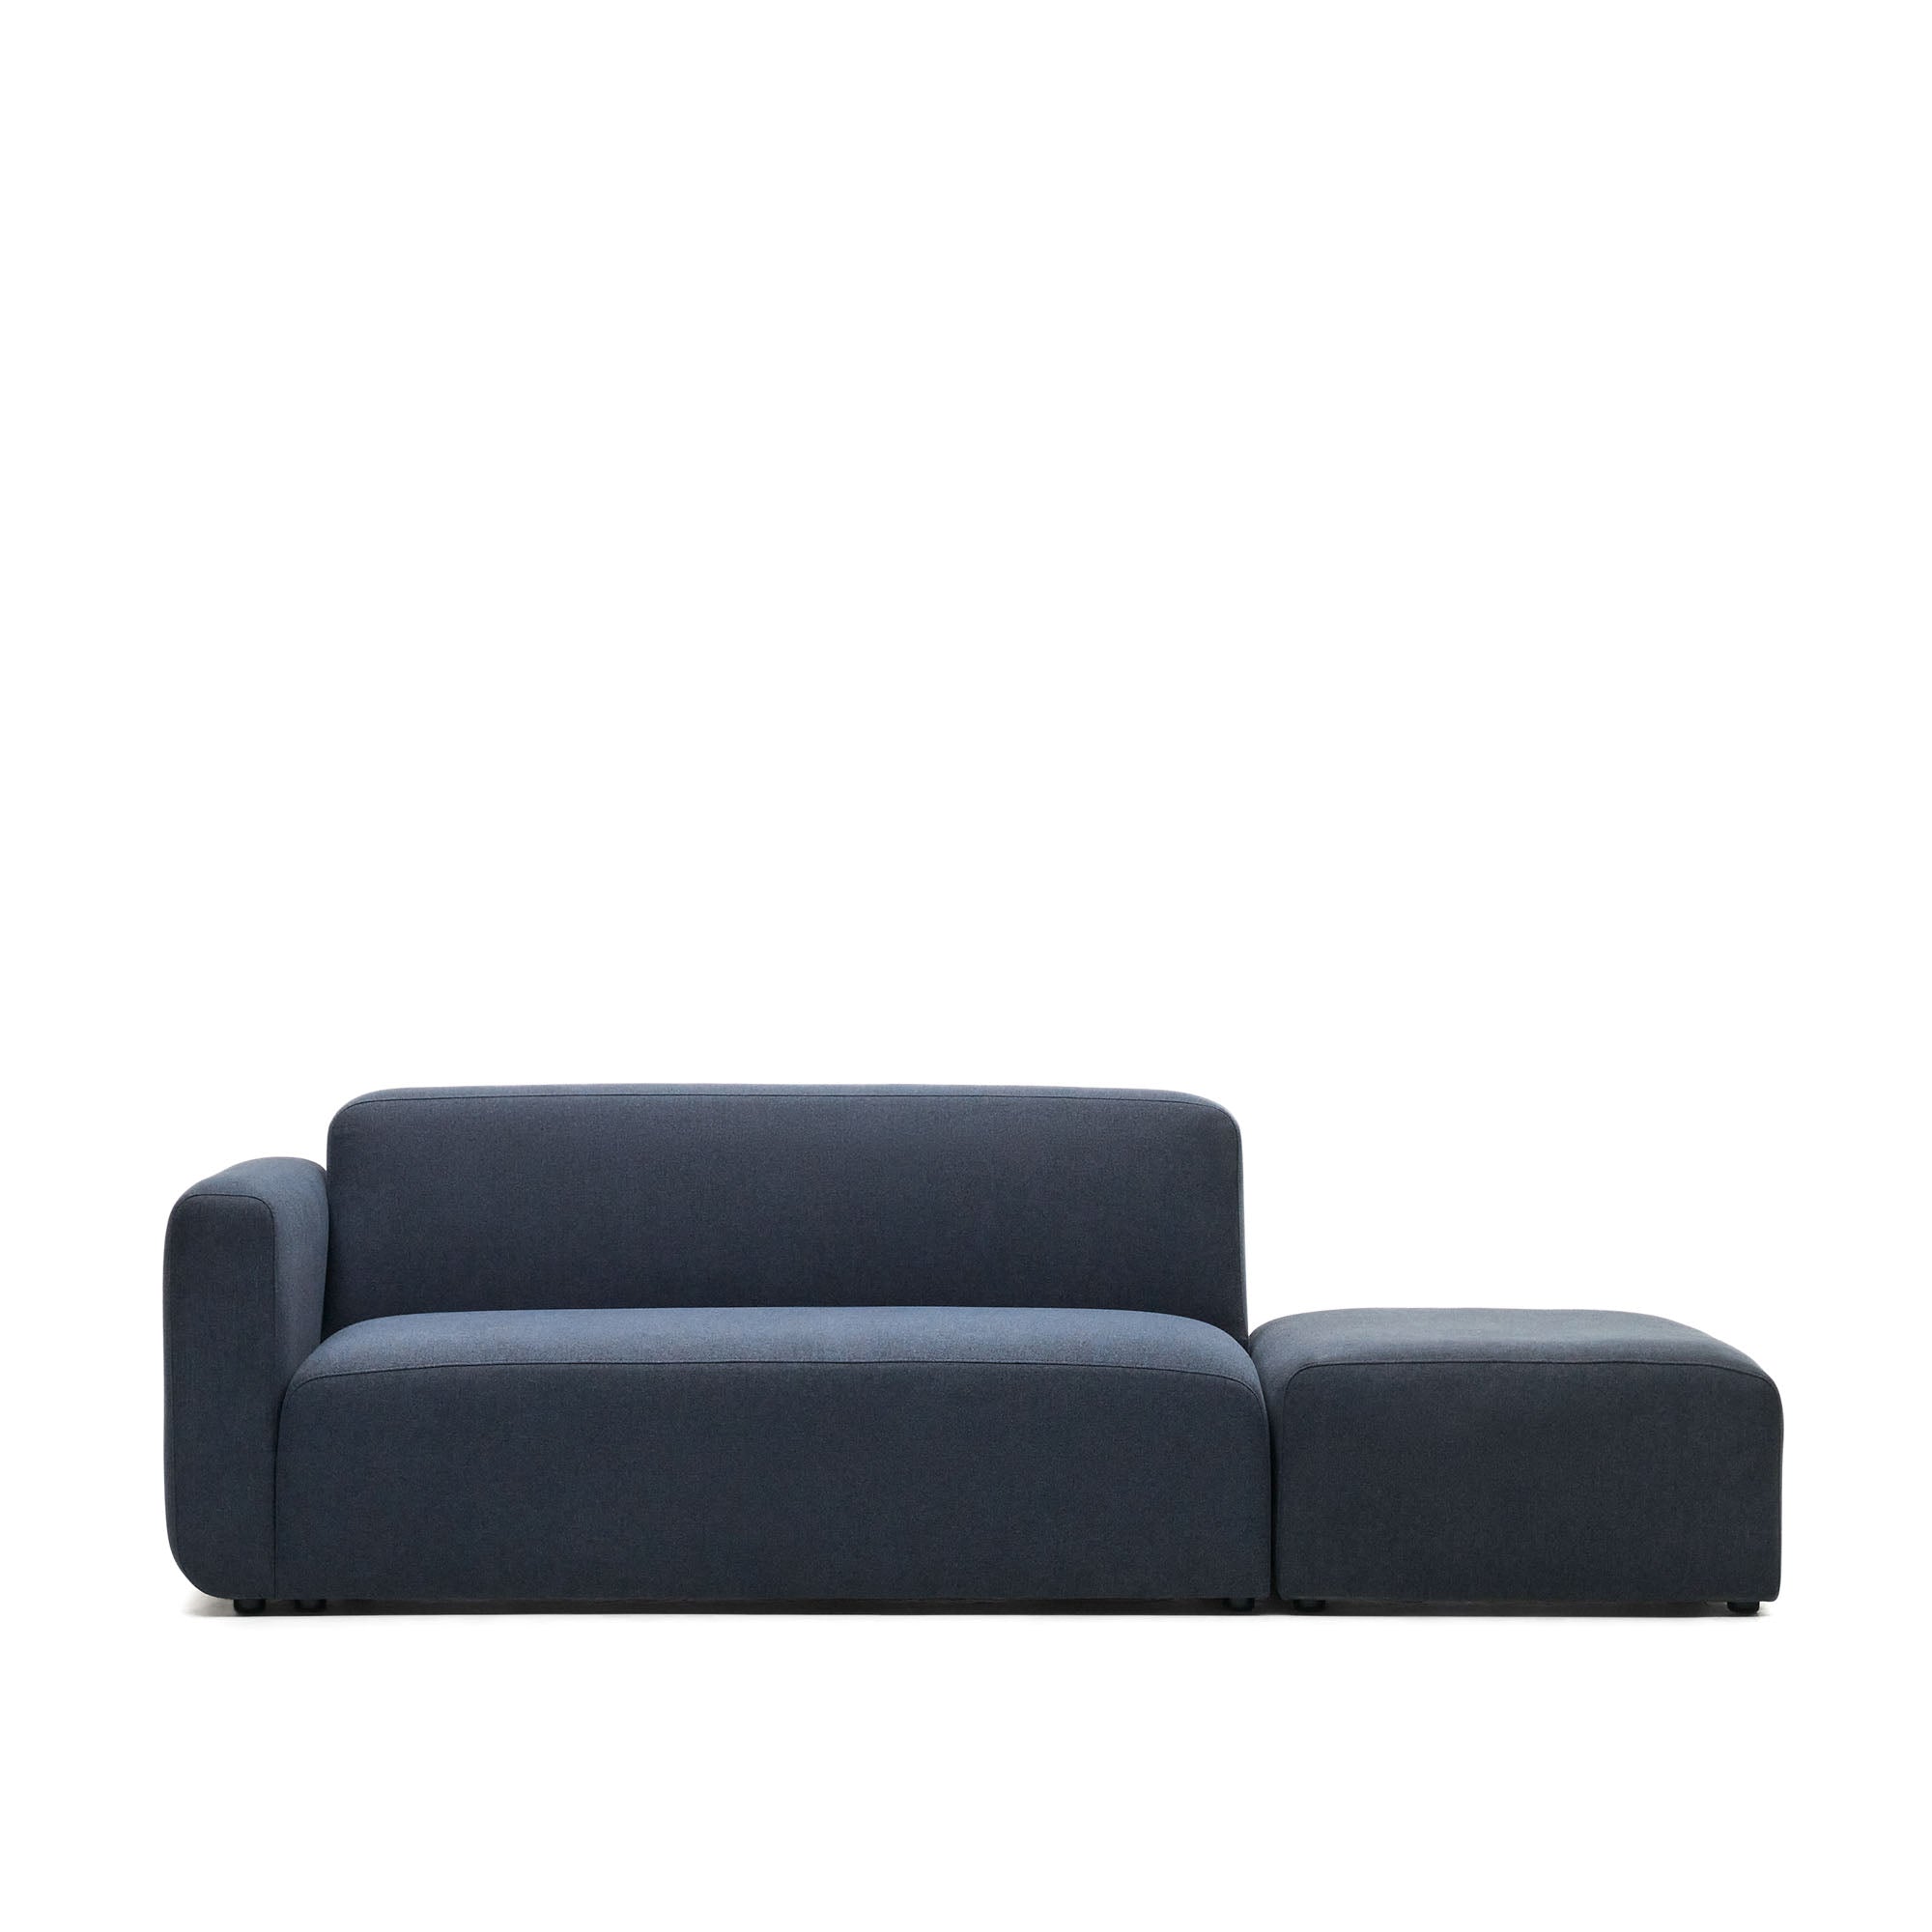 Neom 2 seater modular sofa with back module in blue, 244 cm